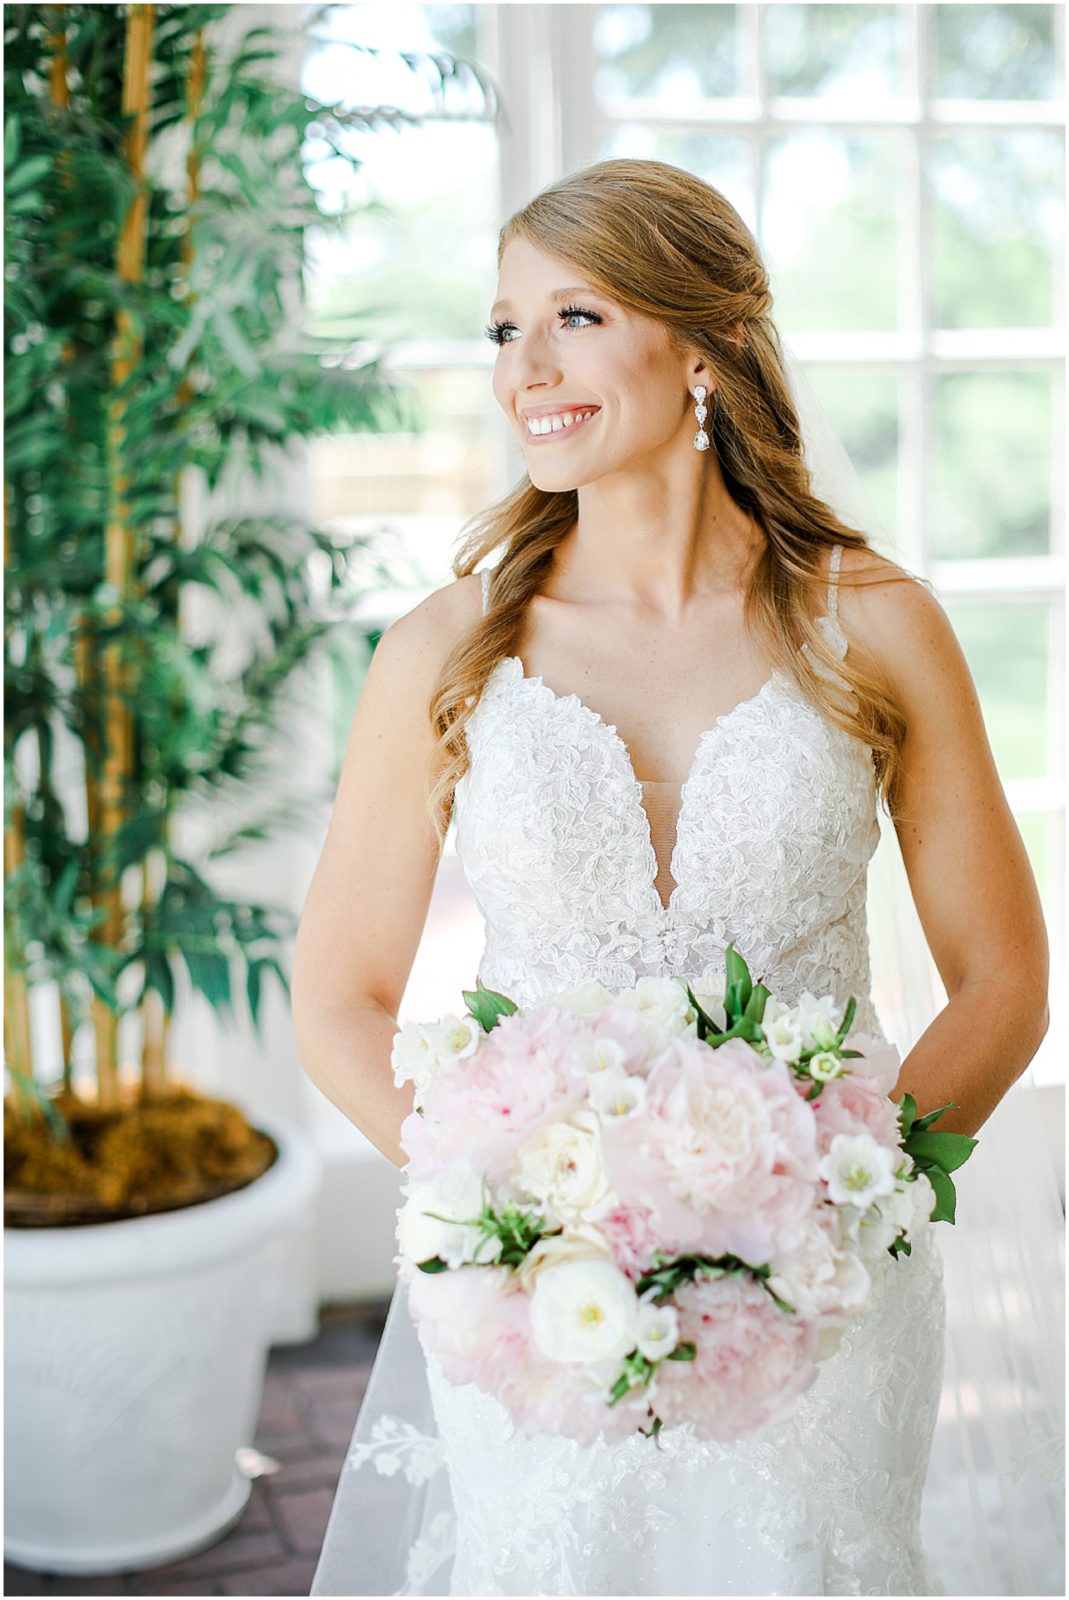 beautiful bride looking out the window wearing lace wedding dress